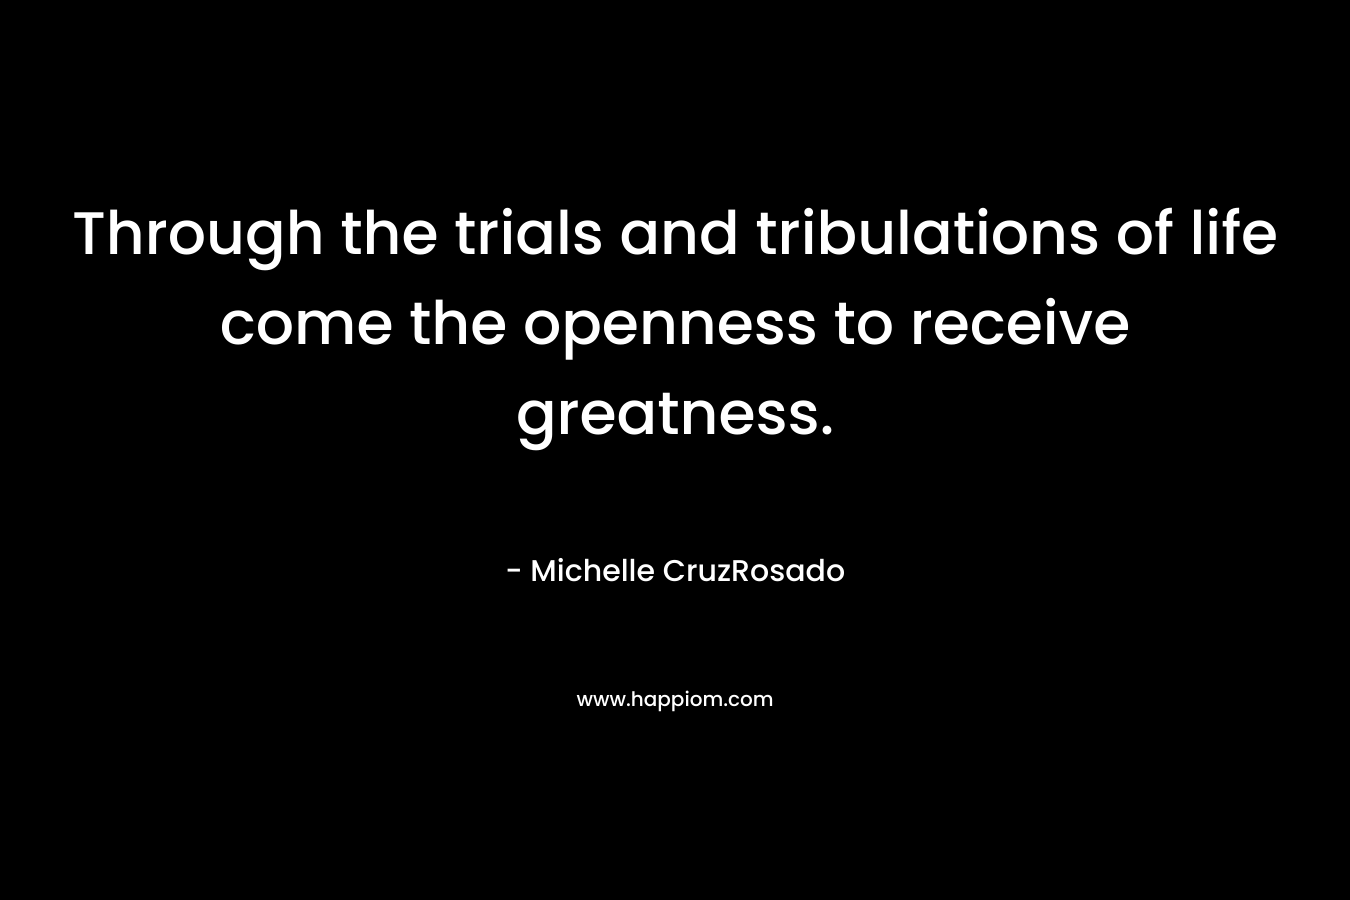 Through the trials and tribulations of life come the openness to receive greatness. – Michelle CruzRosado